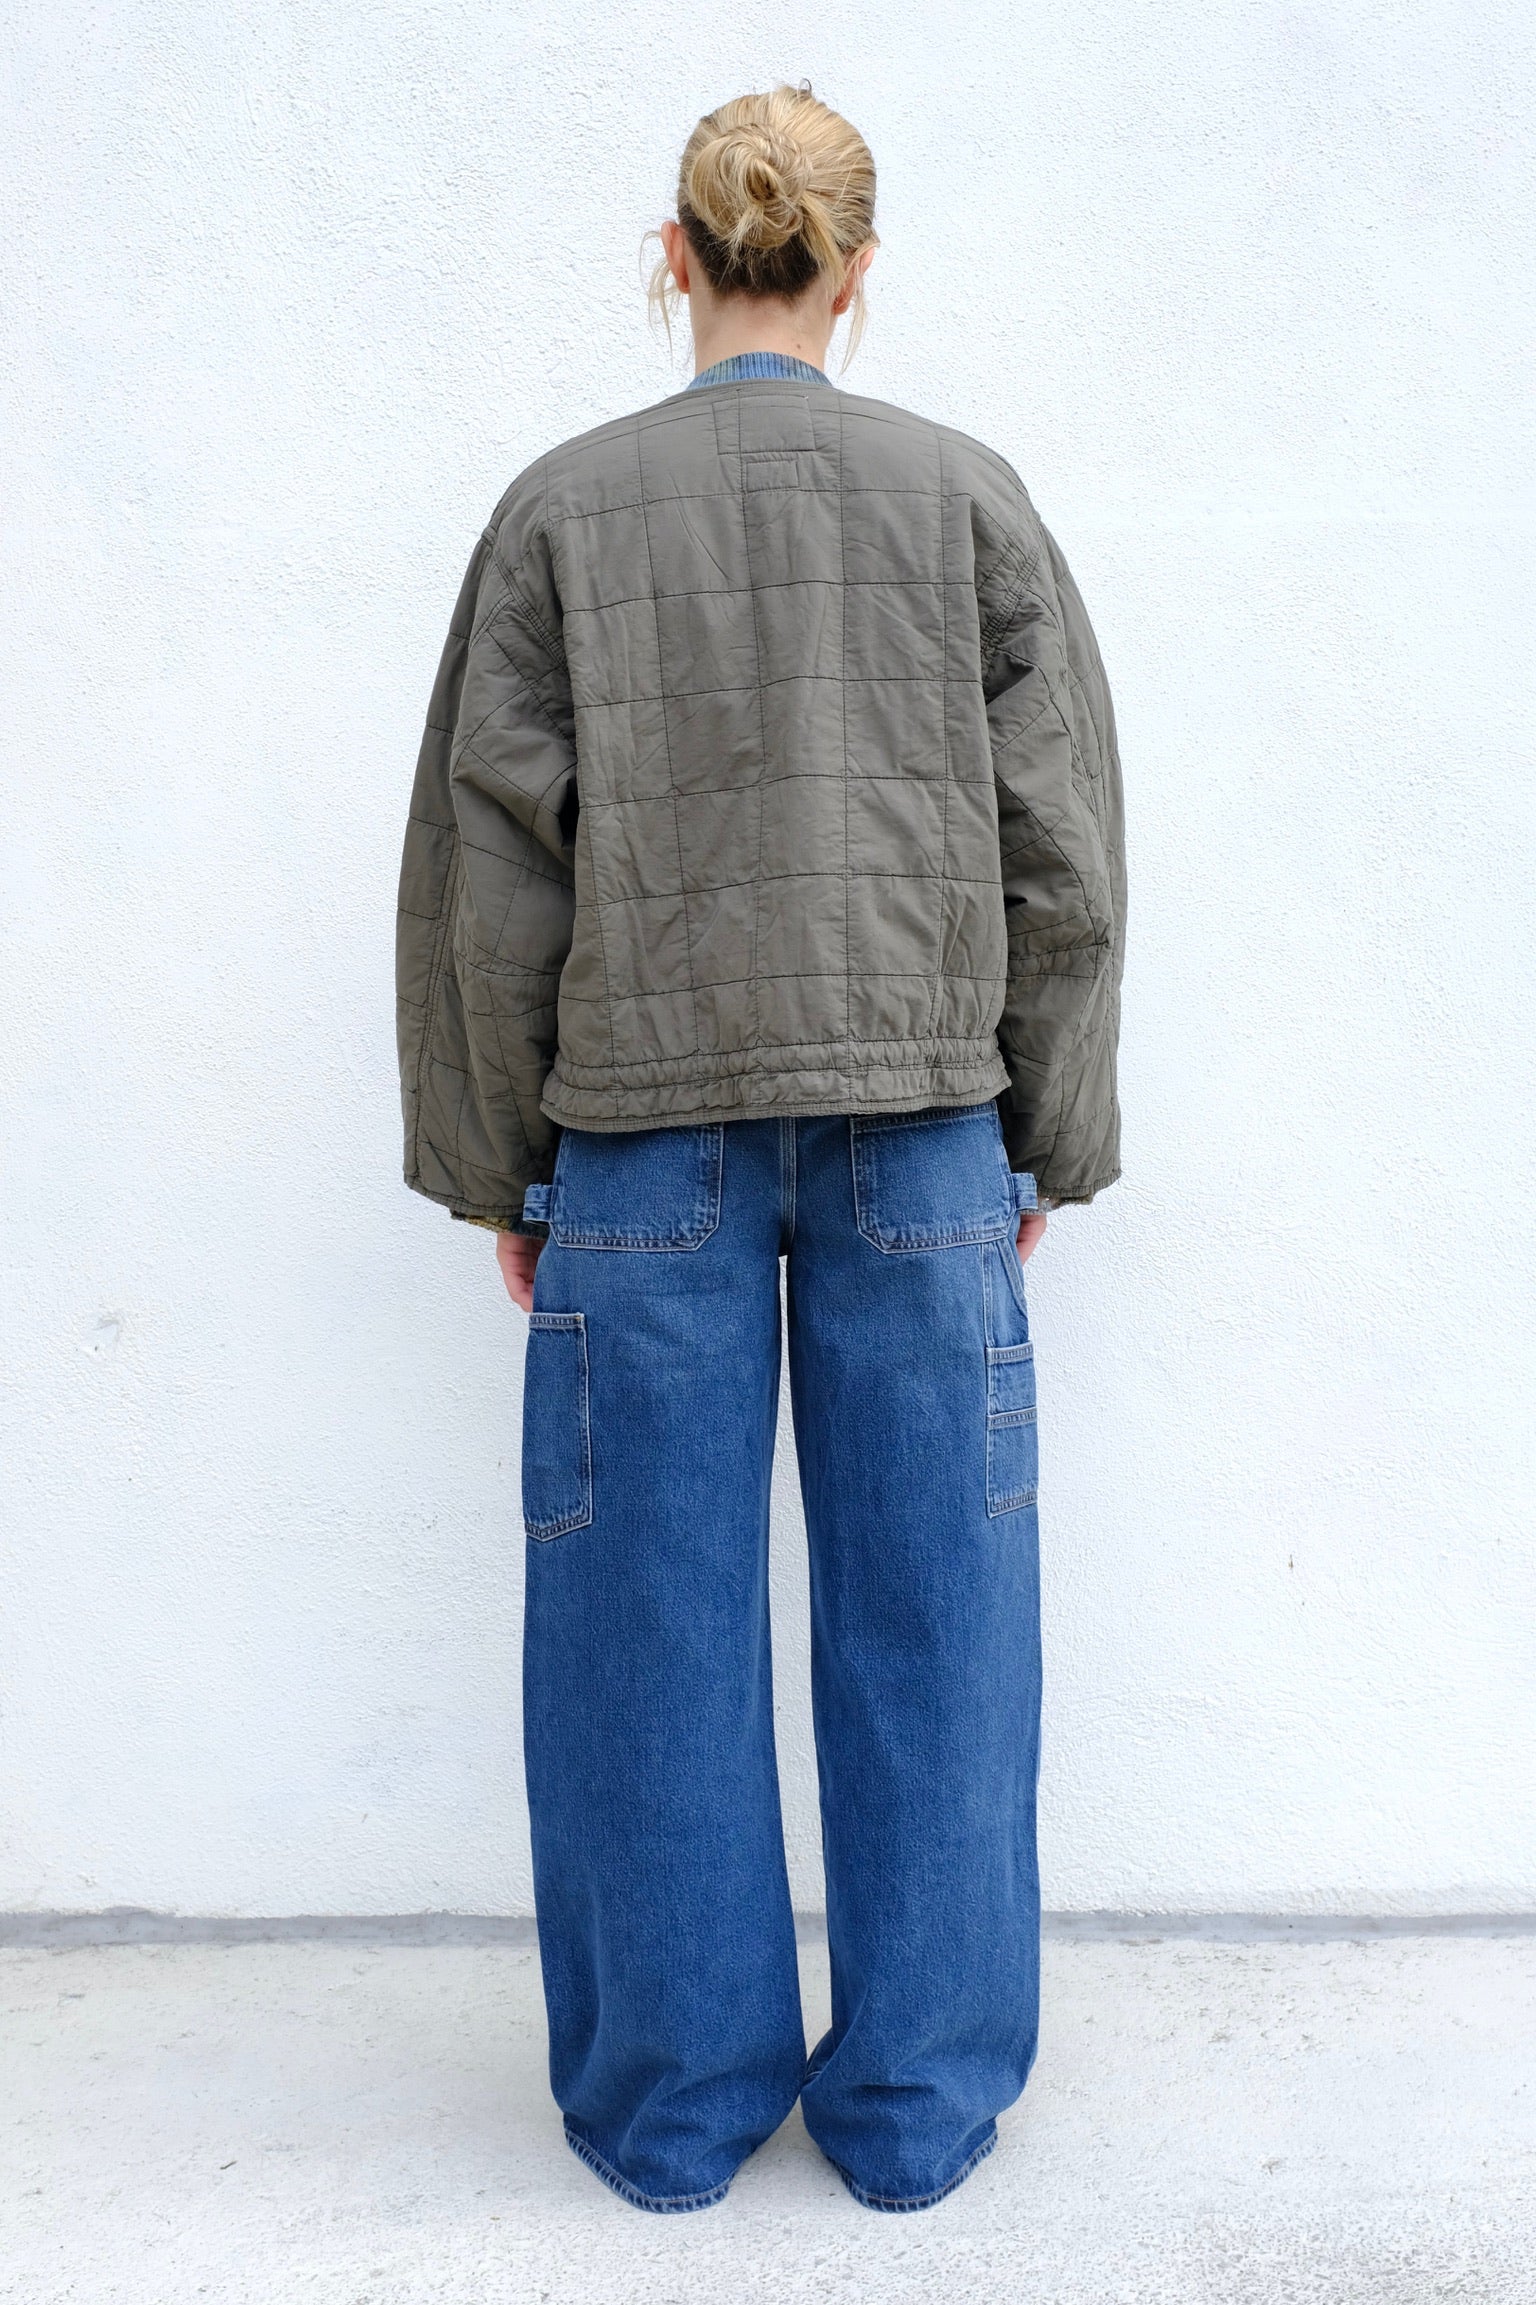 QUILTED Pants/green Quilted Pants/military Pant Liners/hungarian